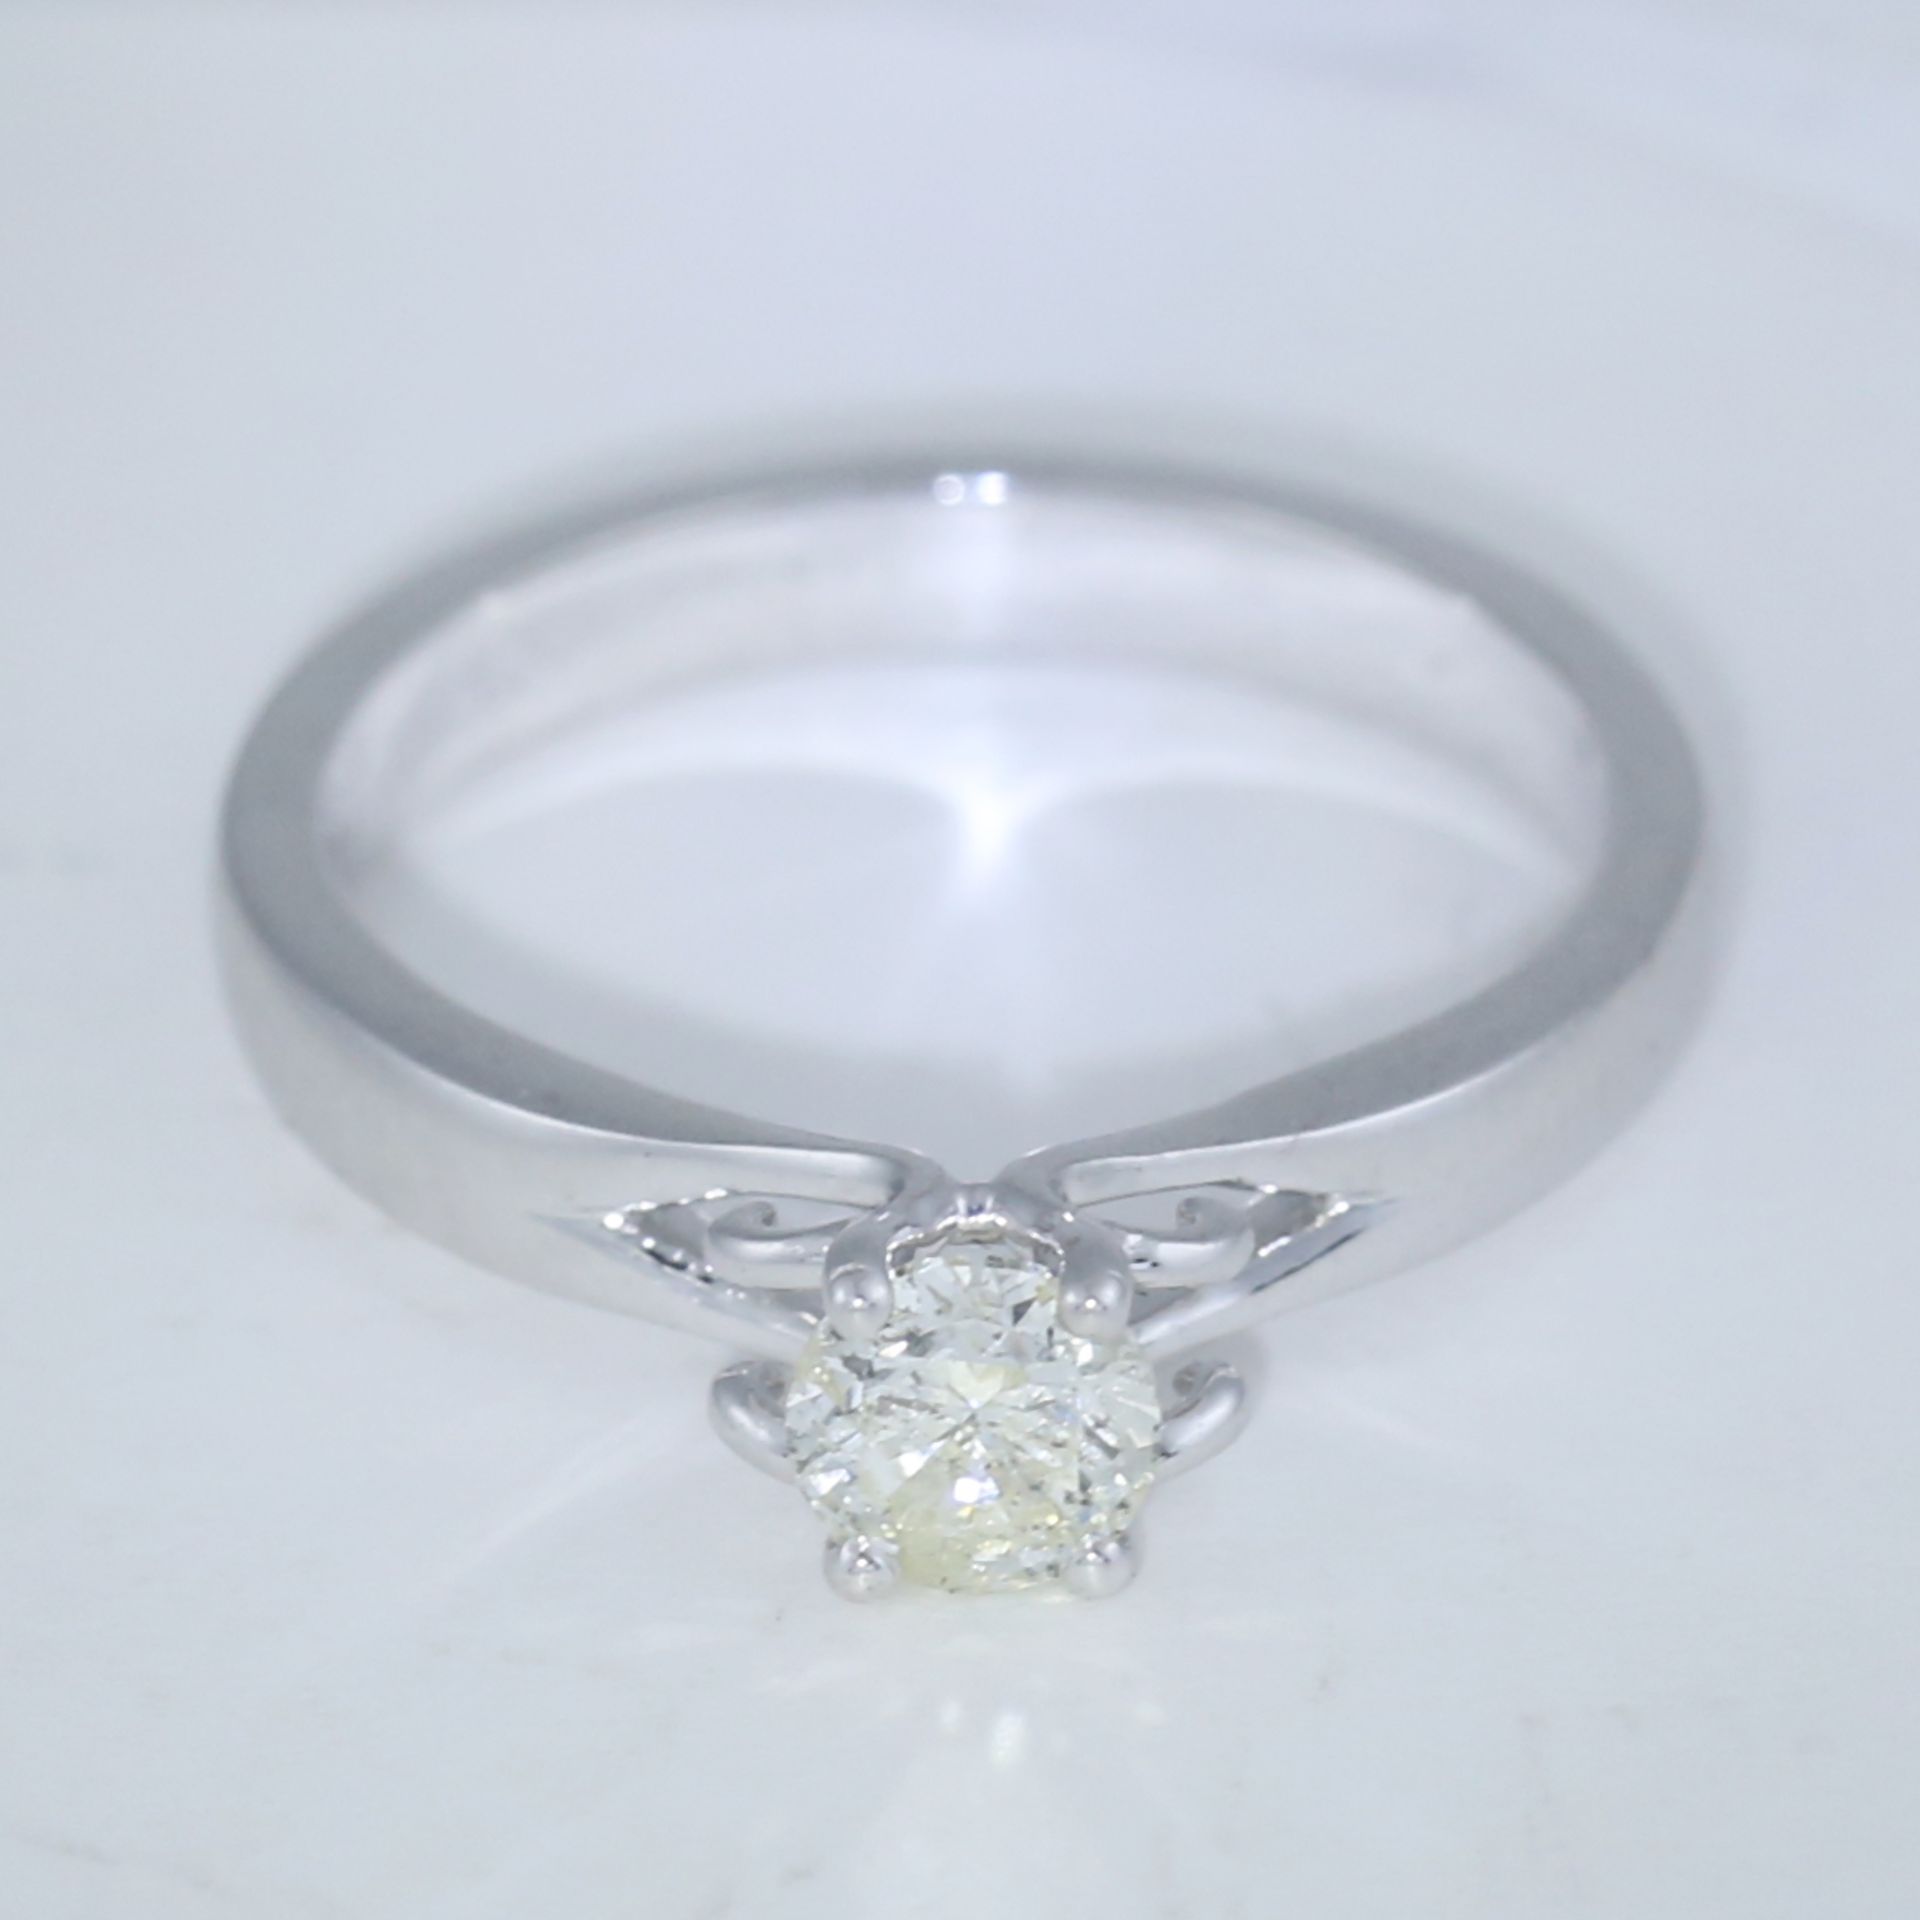 14 K White Gold Certified Solitaire Diamond Ring - Image 2 of 7